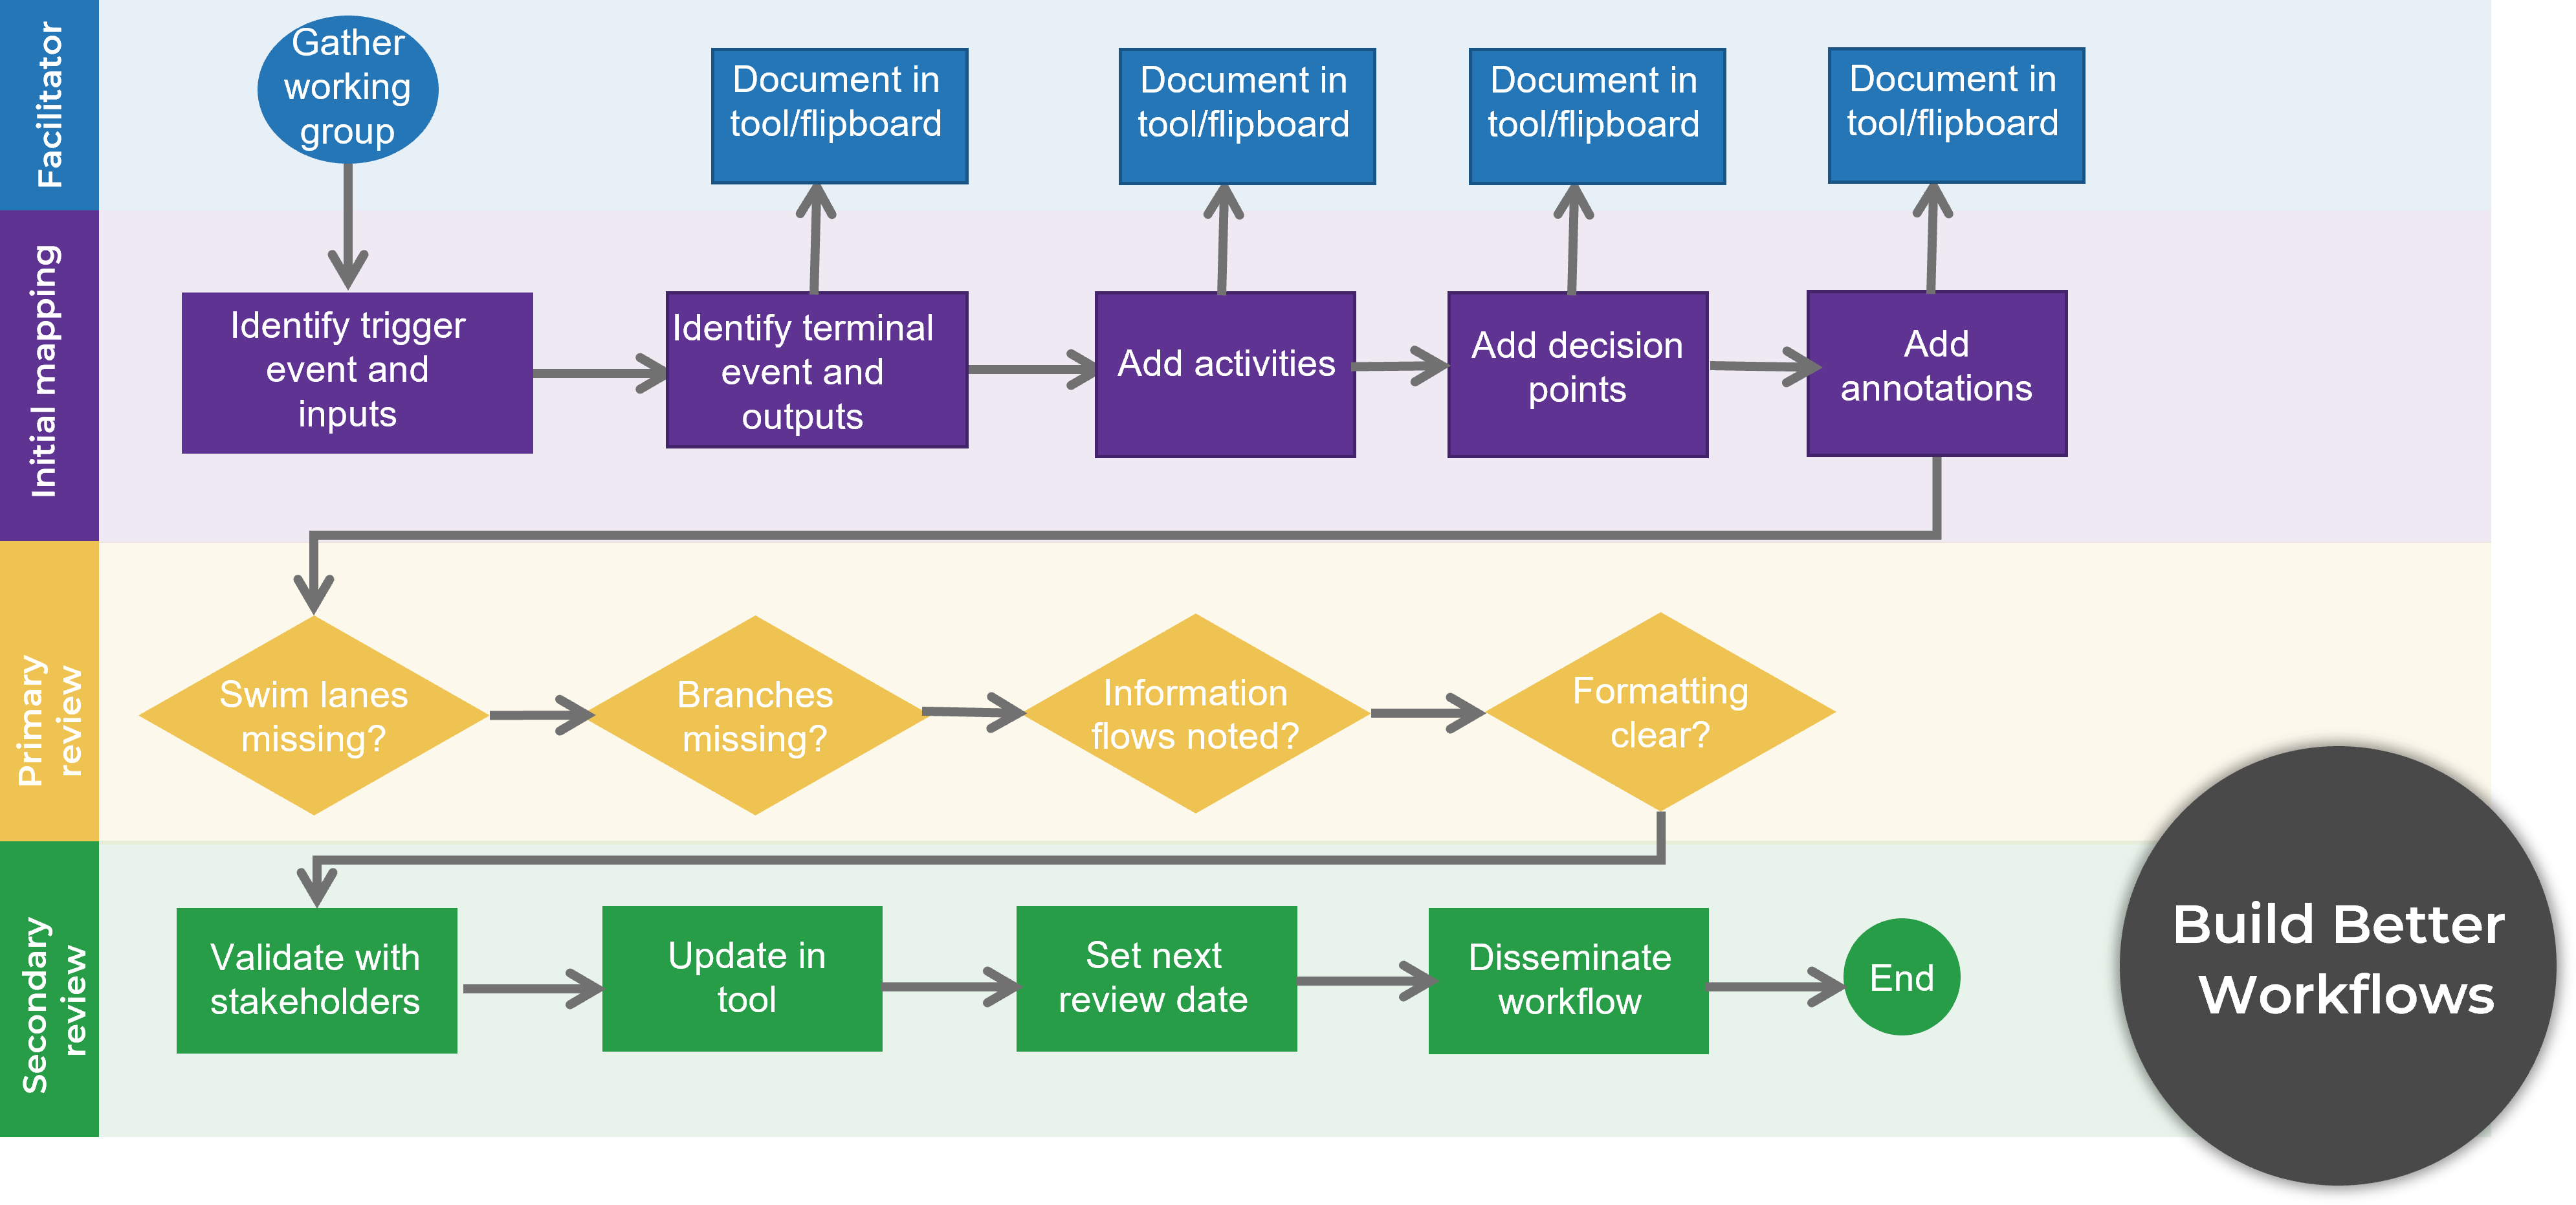 The image contains a screenshot of a diagram that demonstrates the steps needed to build better workflows.